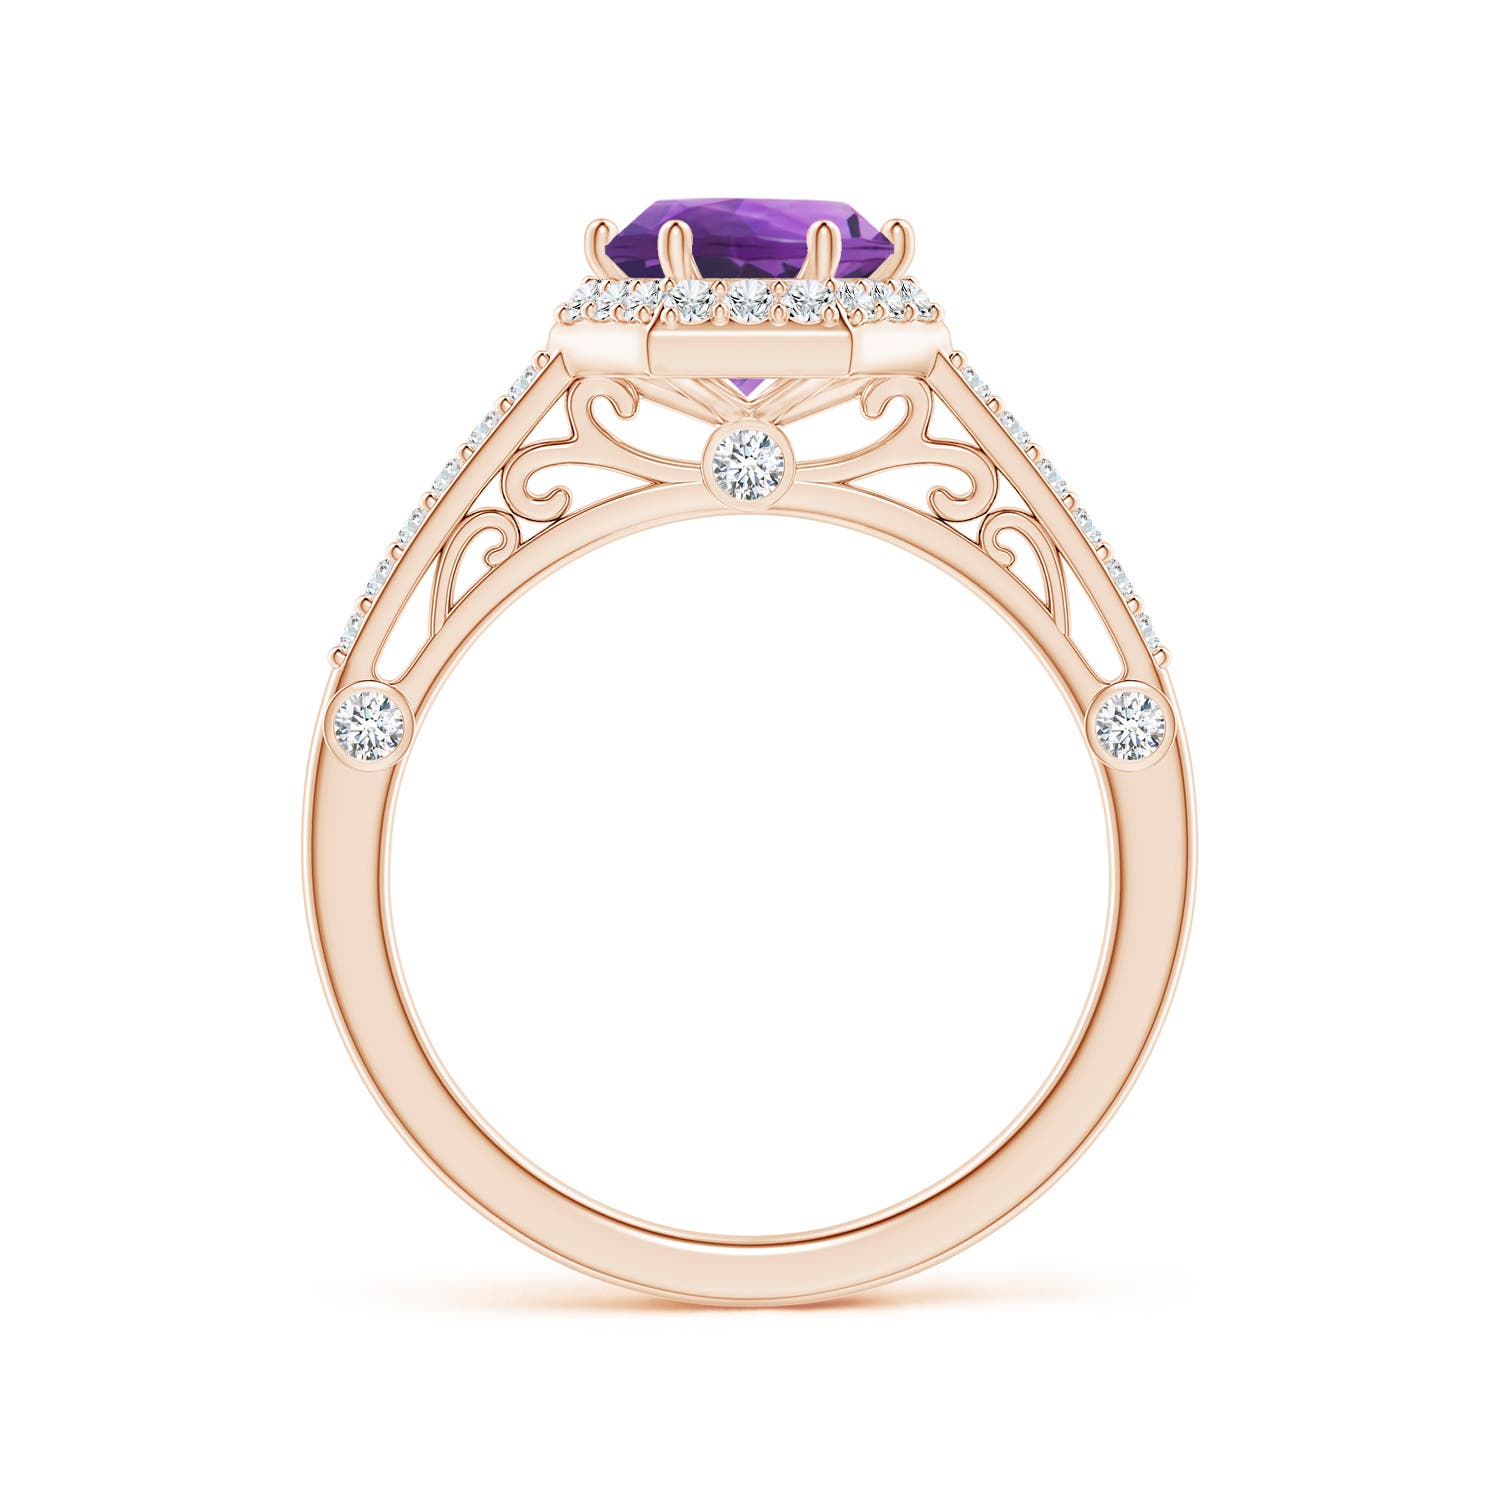 AAA - Amethyst / 1.52 CT / 14 KT Rose Gold